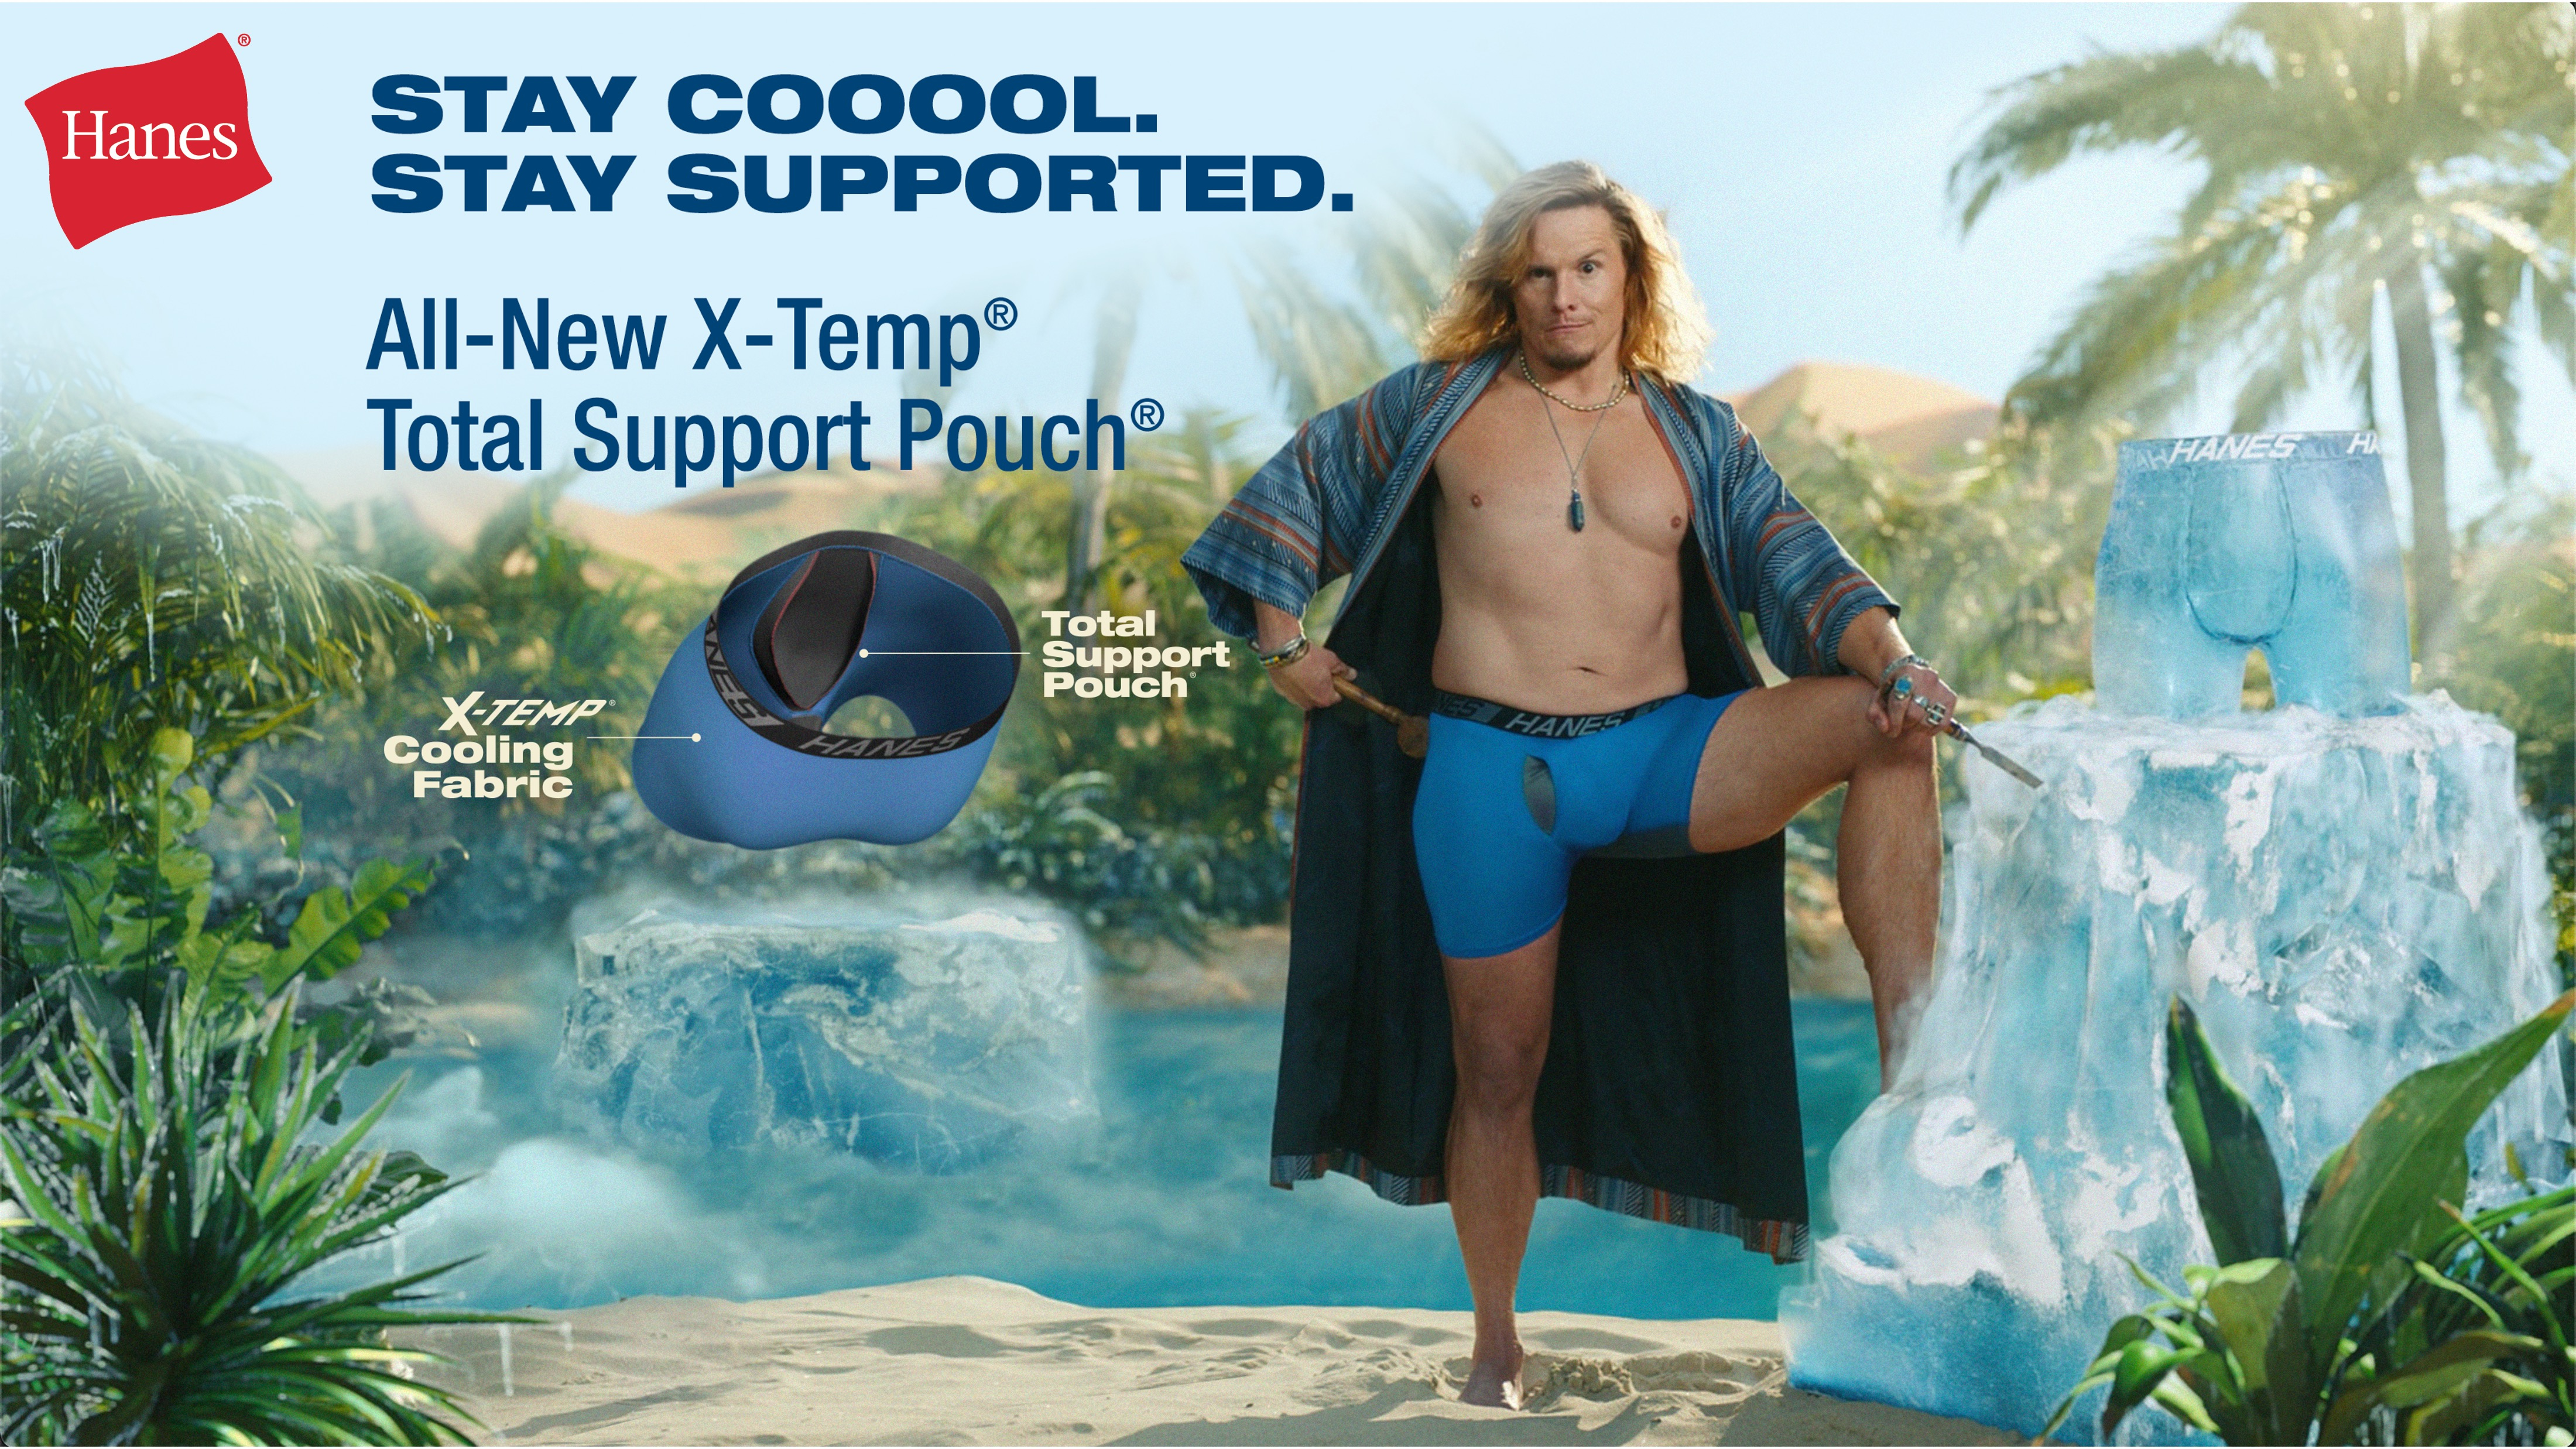 https://mms.businesswire.com/media/20220414005233/en/1420979/5/Hanes_Introduces_The_New_X-Temp_Total_Support_Pouch.jpg